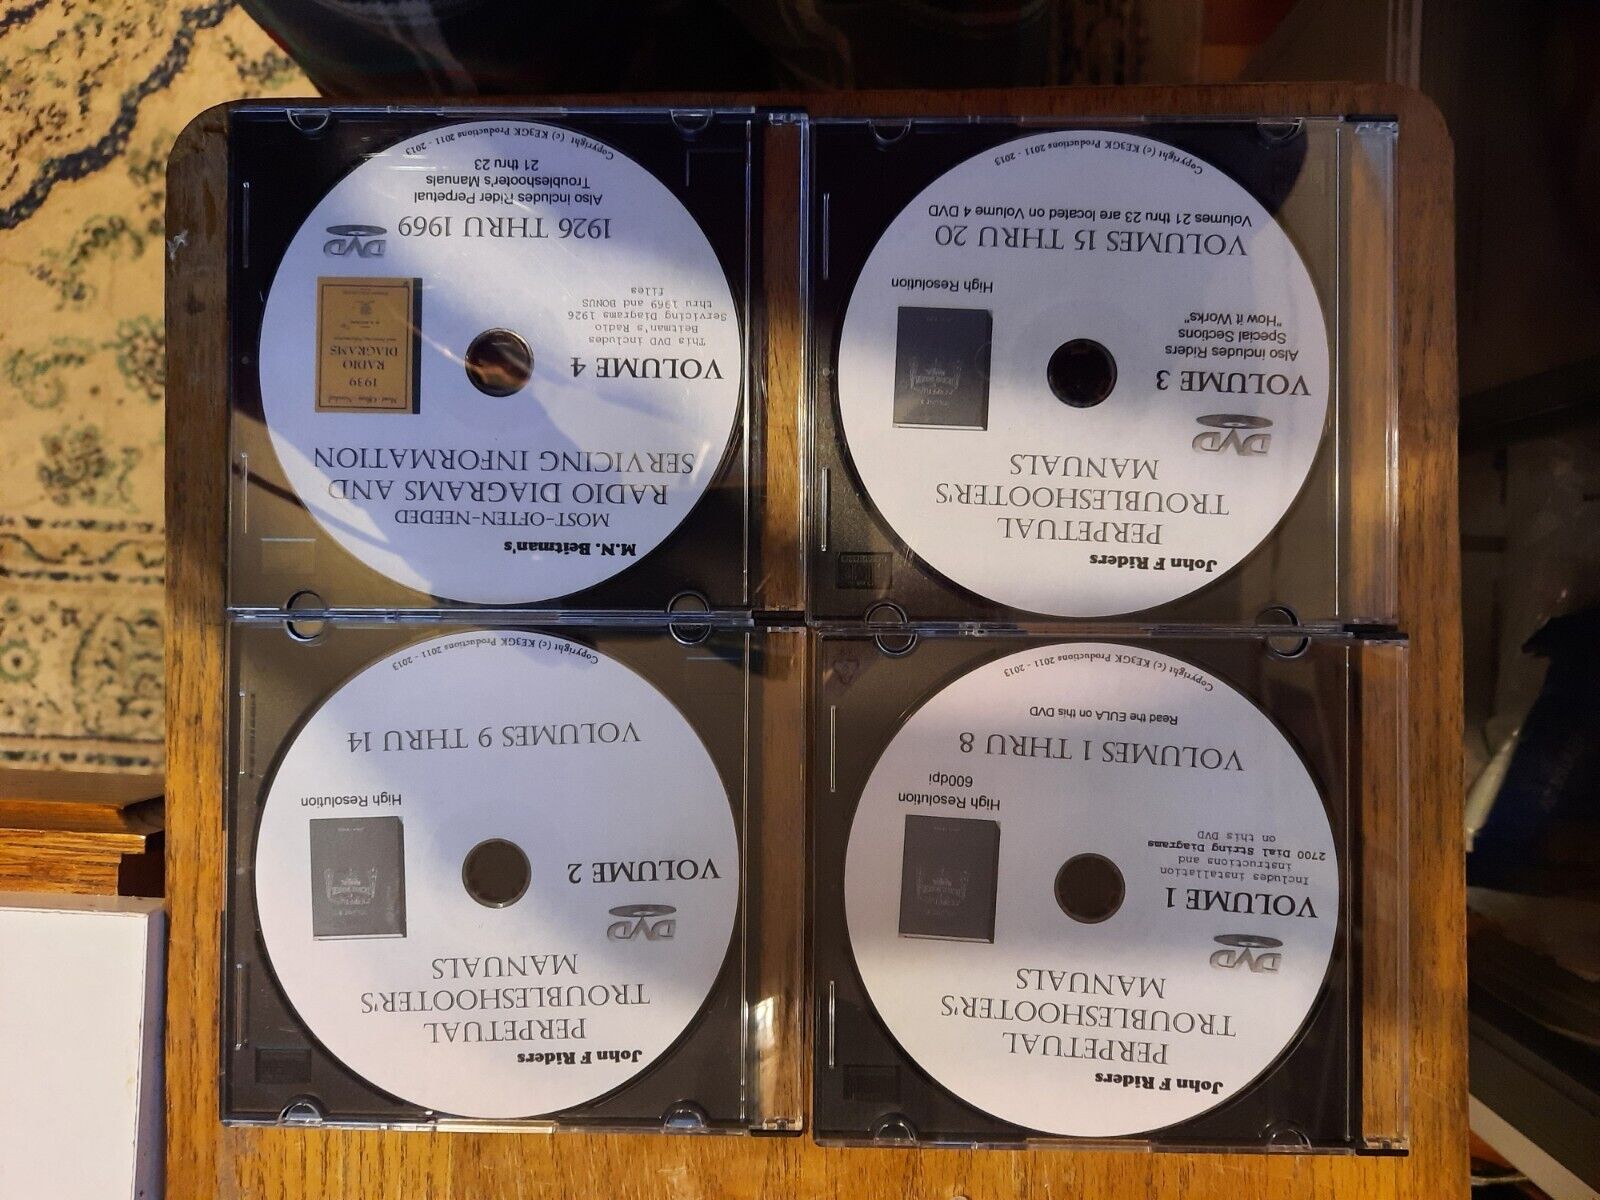 John F. Riders Perpetual Troubleshooters Manuals on 4 DVD's SAMS